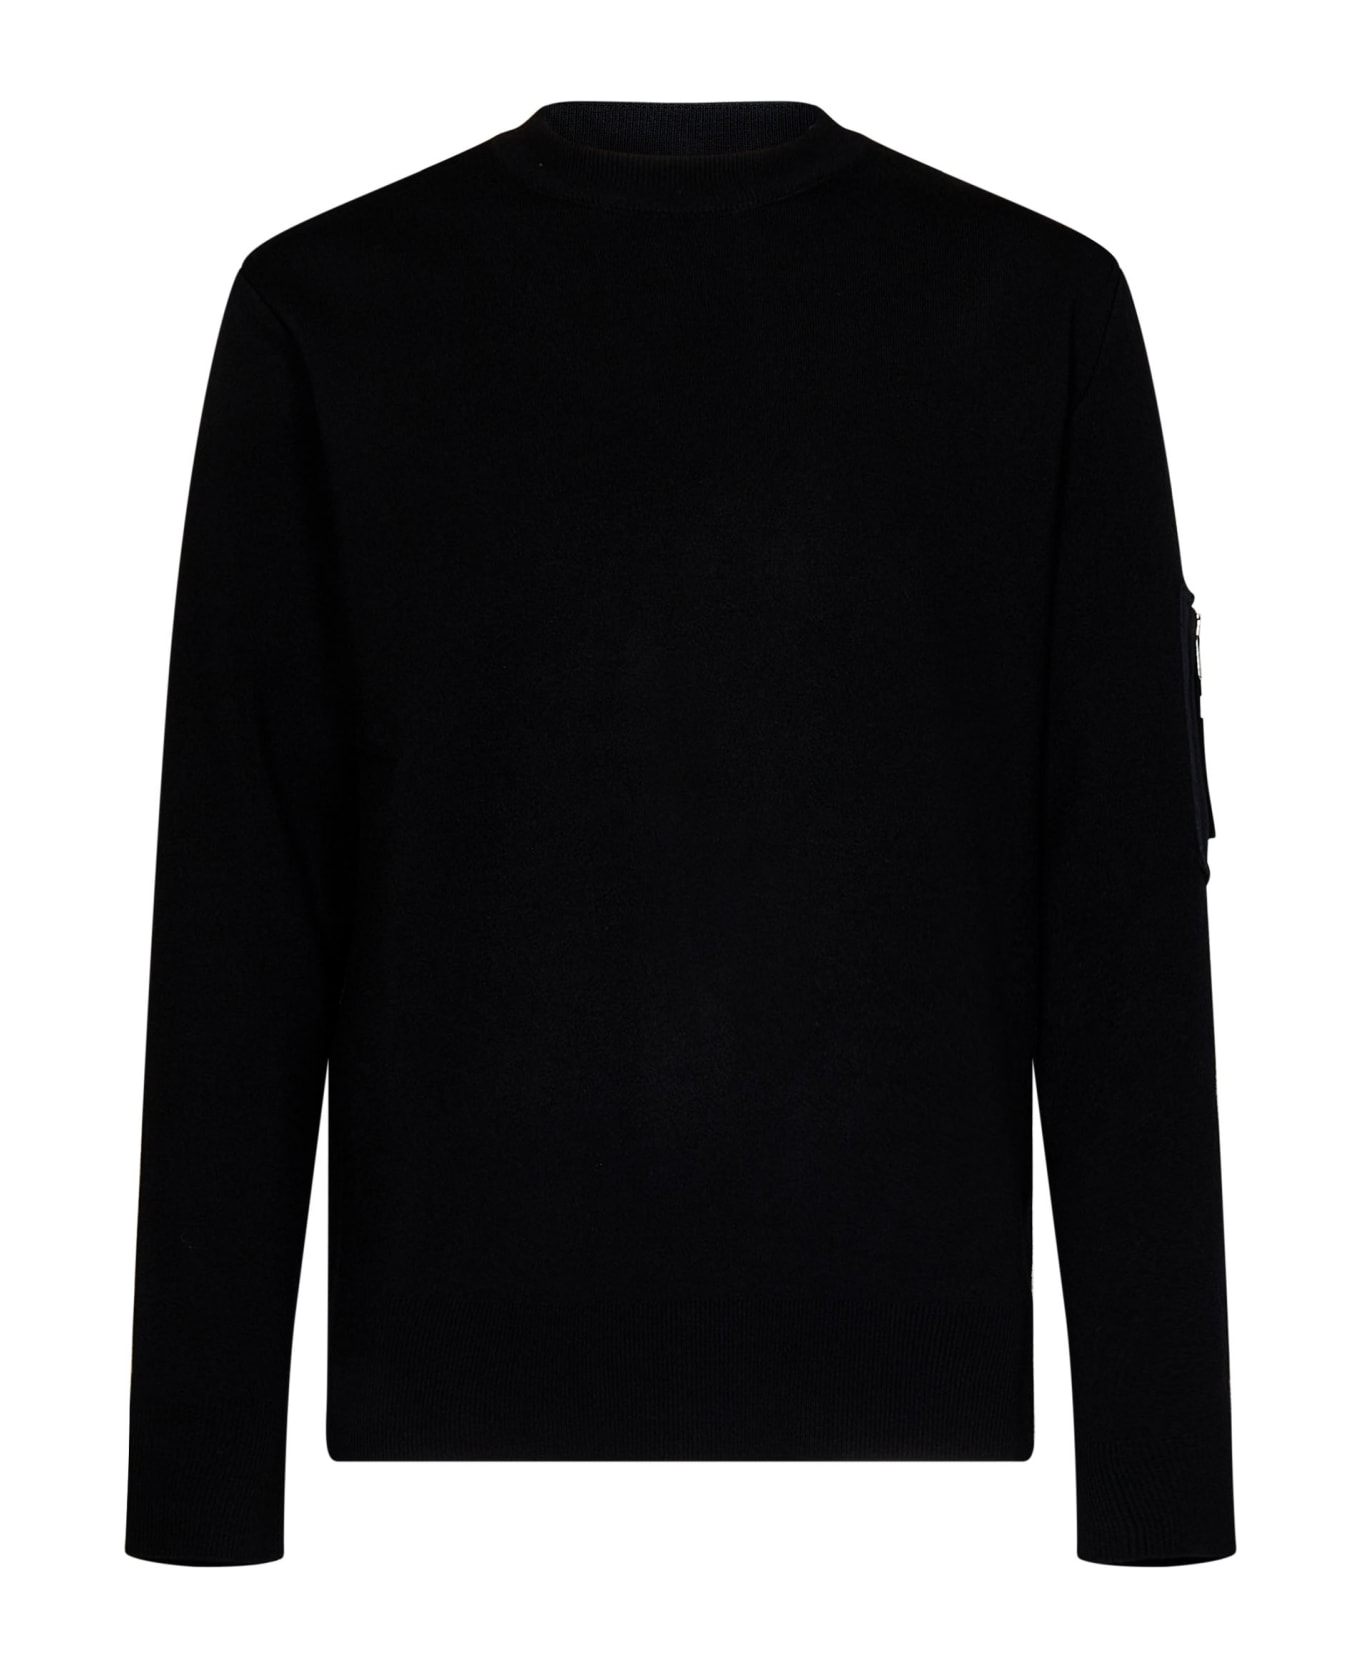 Givenchy Wool Sweater - Black